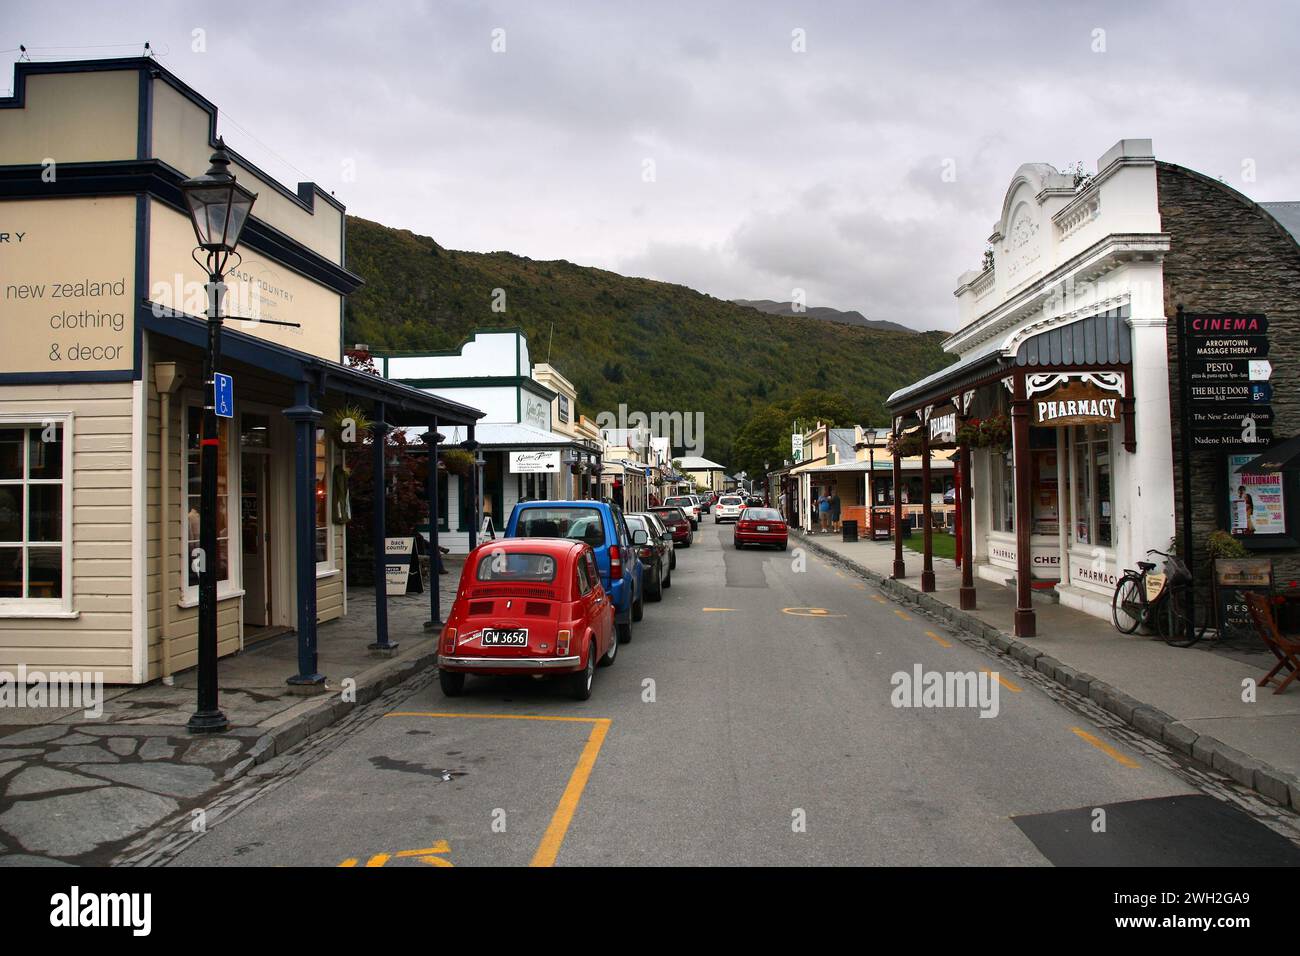 ARROWTOWN, NEW ZEALAND - FEBRUARY 29, 2009: People visit Arrowtown in New Zealand. Arrowtown is a historic gold mining town in the Otago region Stock Photo